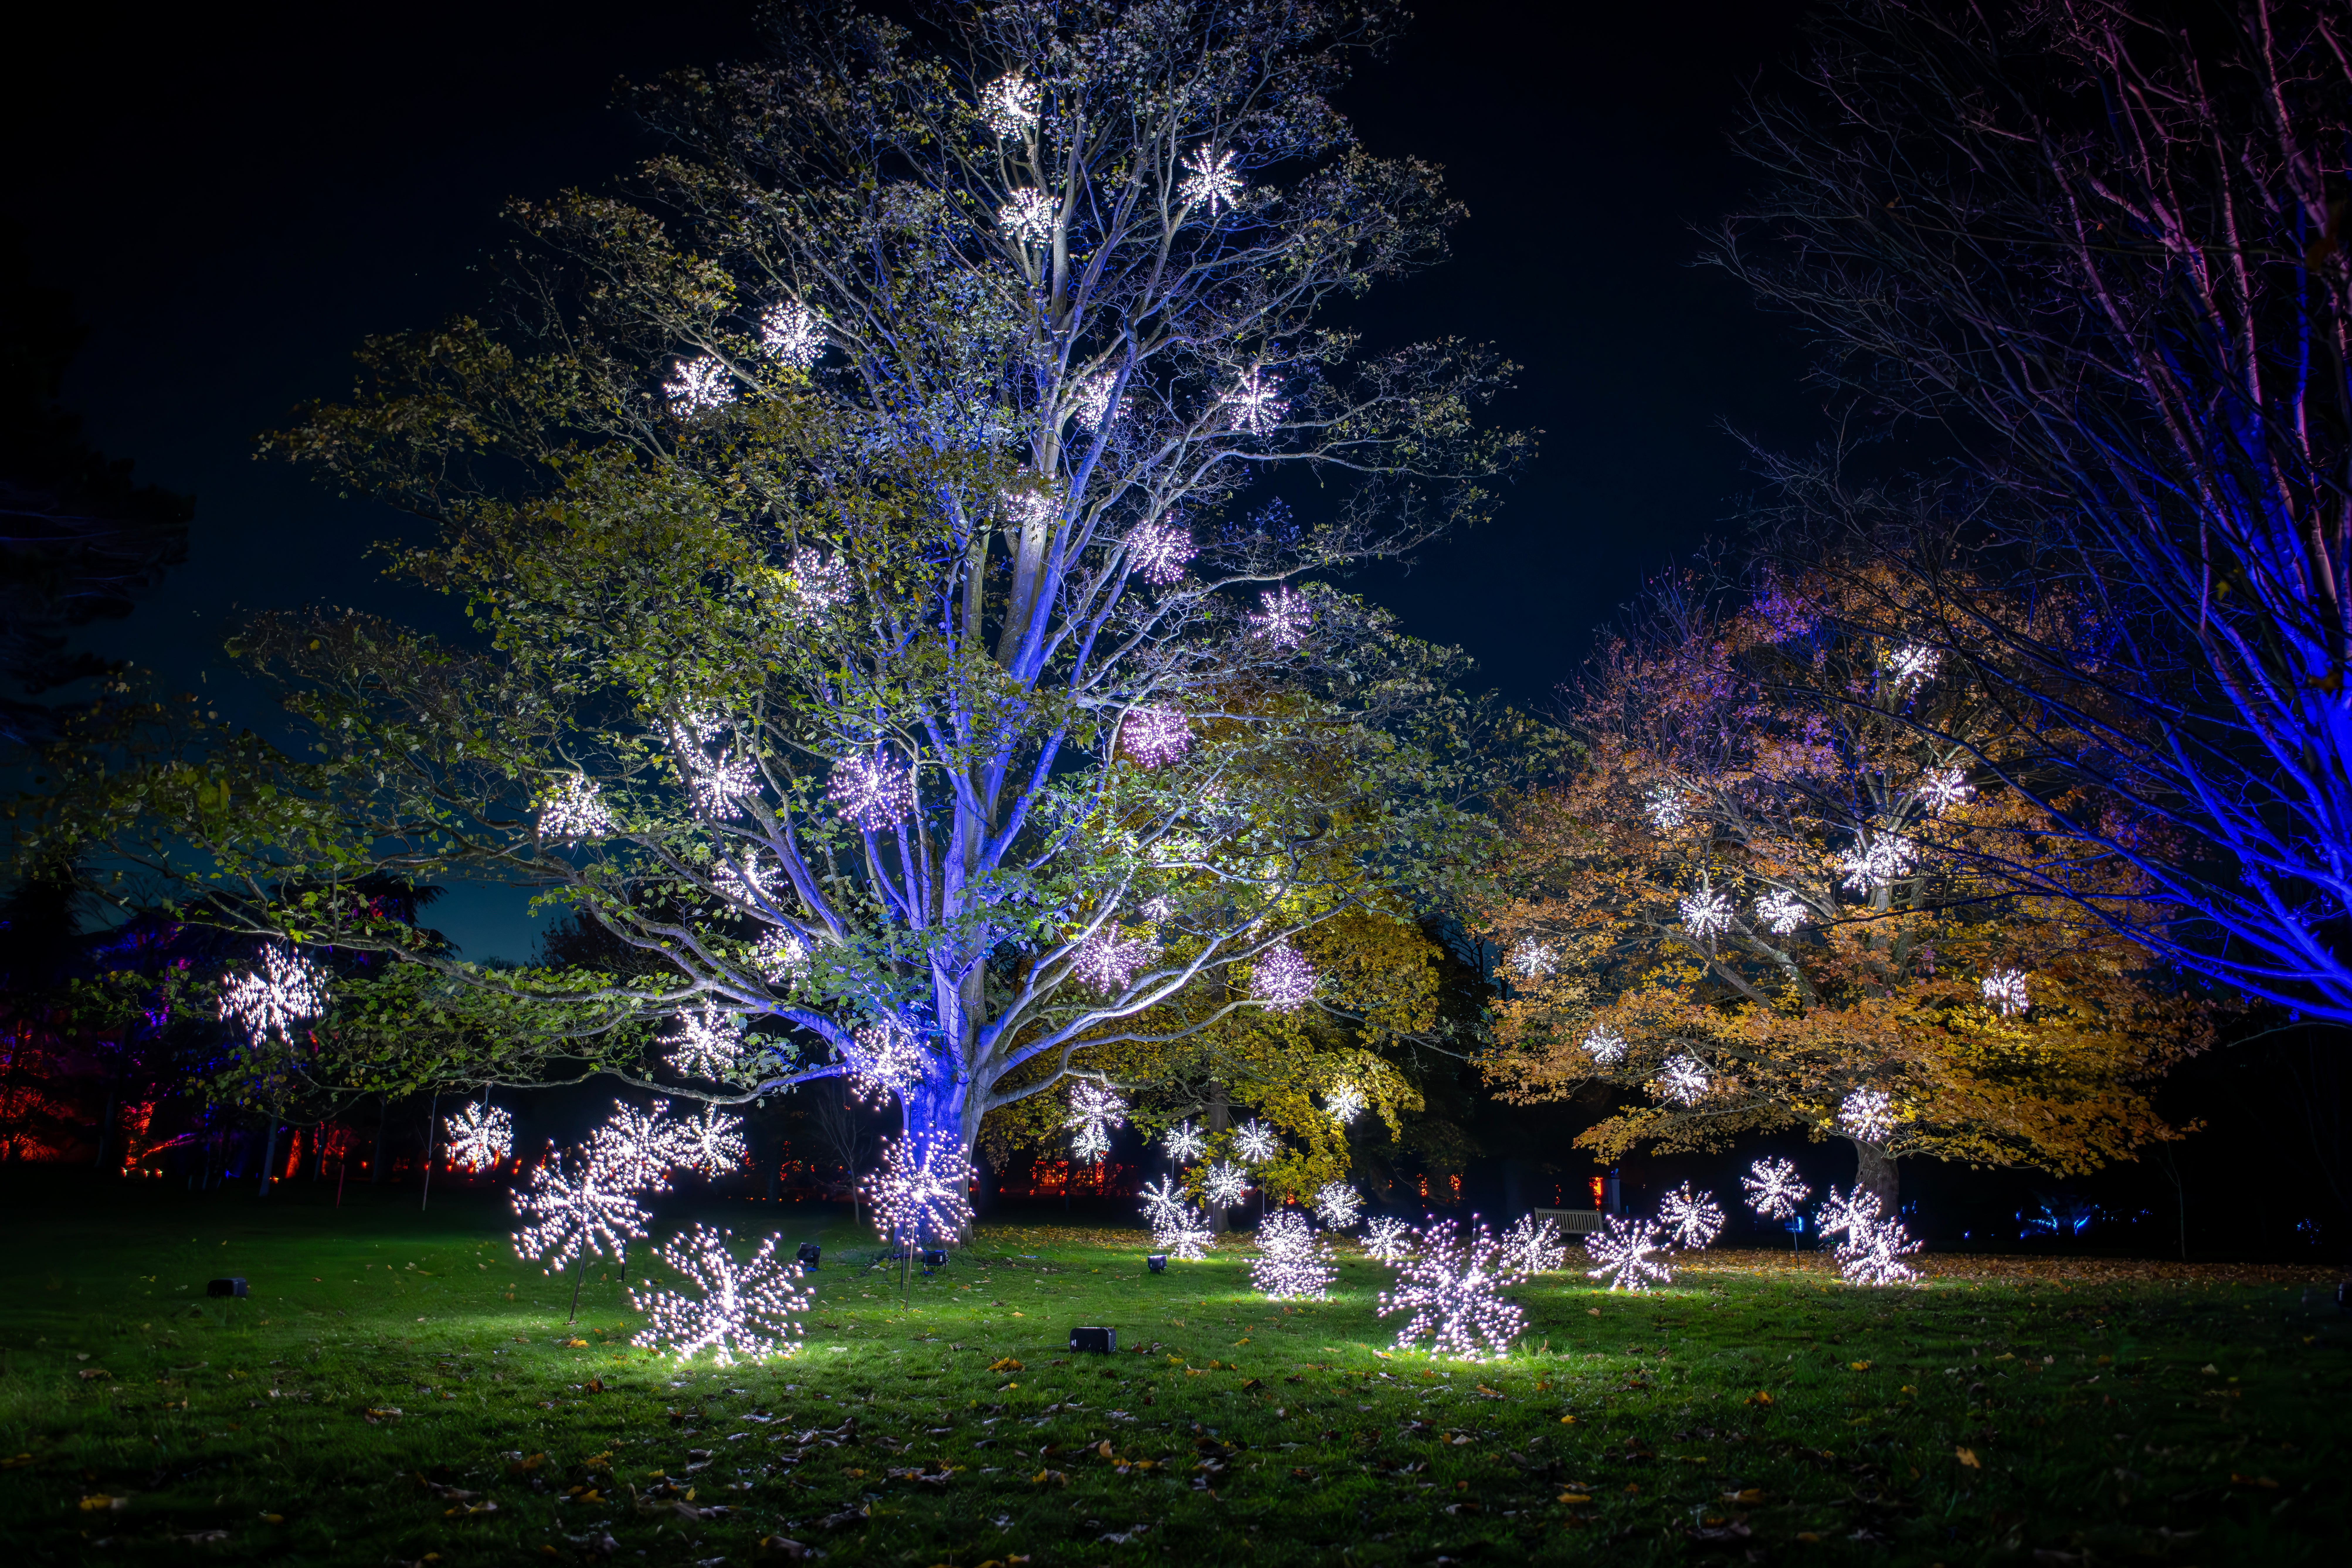 Experience ‘nature by night’ at Kew Gardens